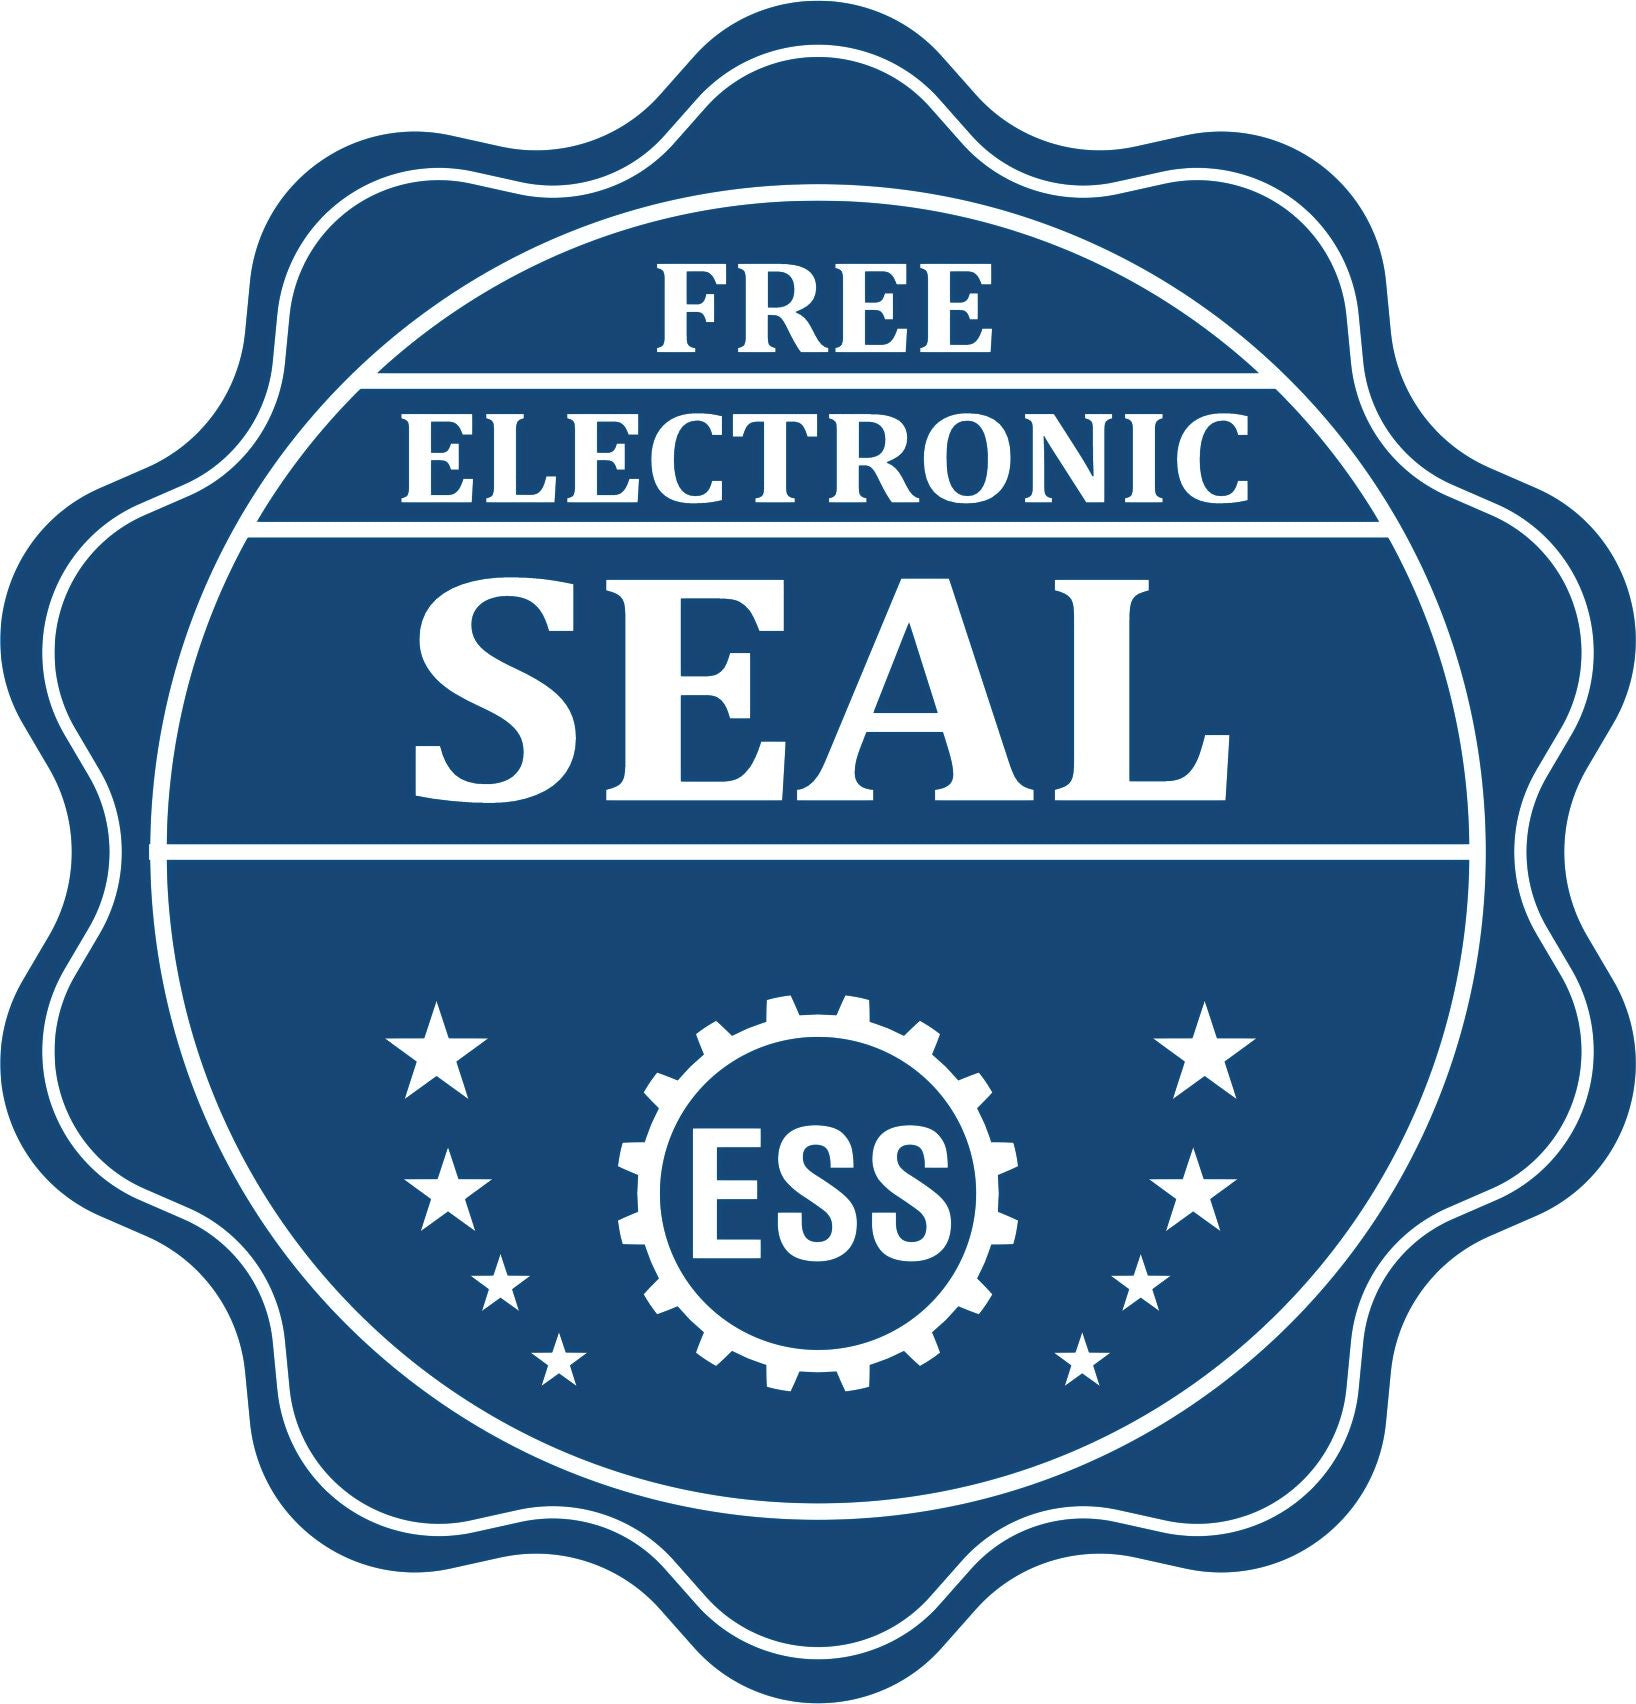 A badge showing a free electronic seal for the Premium MaxLight Pre-Inked Guam Landscape Architectural Stamp with stars and the ESS gear on the emblem.